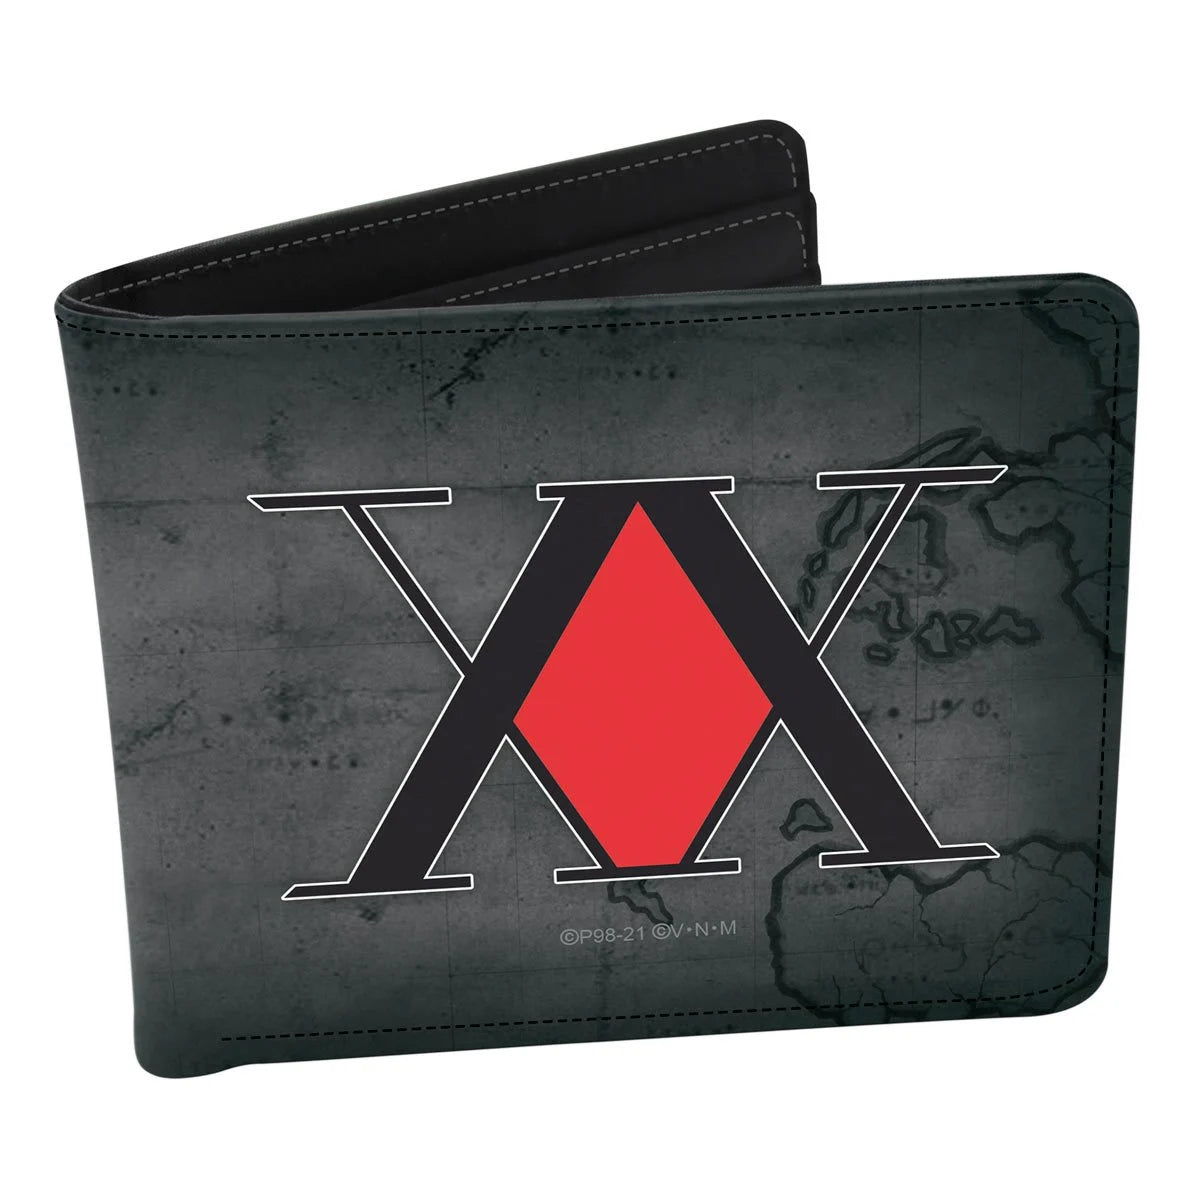 Abysse America - Hunter x Hunter Wallet and Keychain Gift Set - Good Game Anime